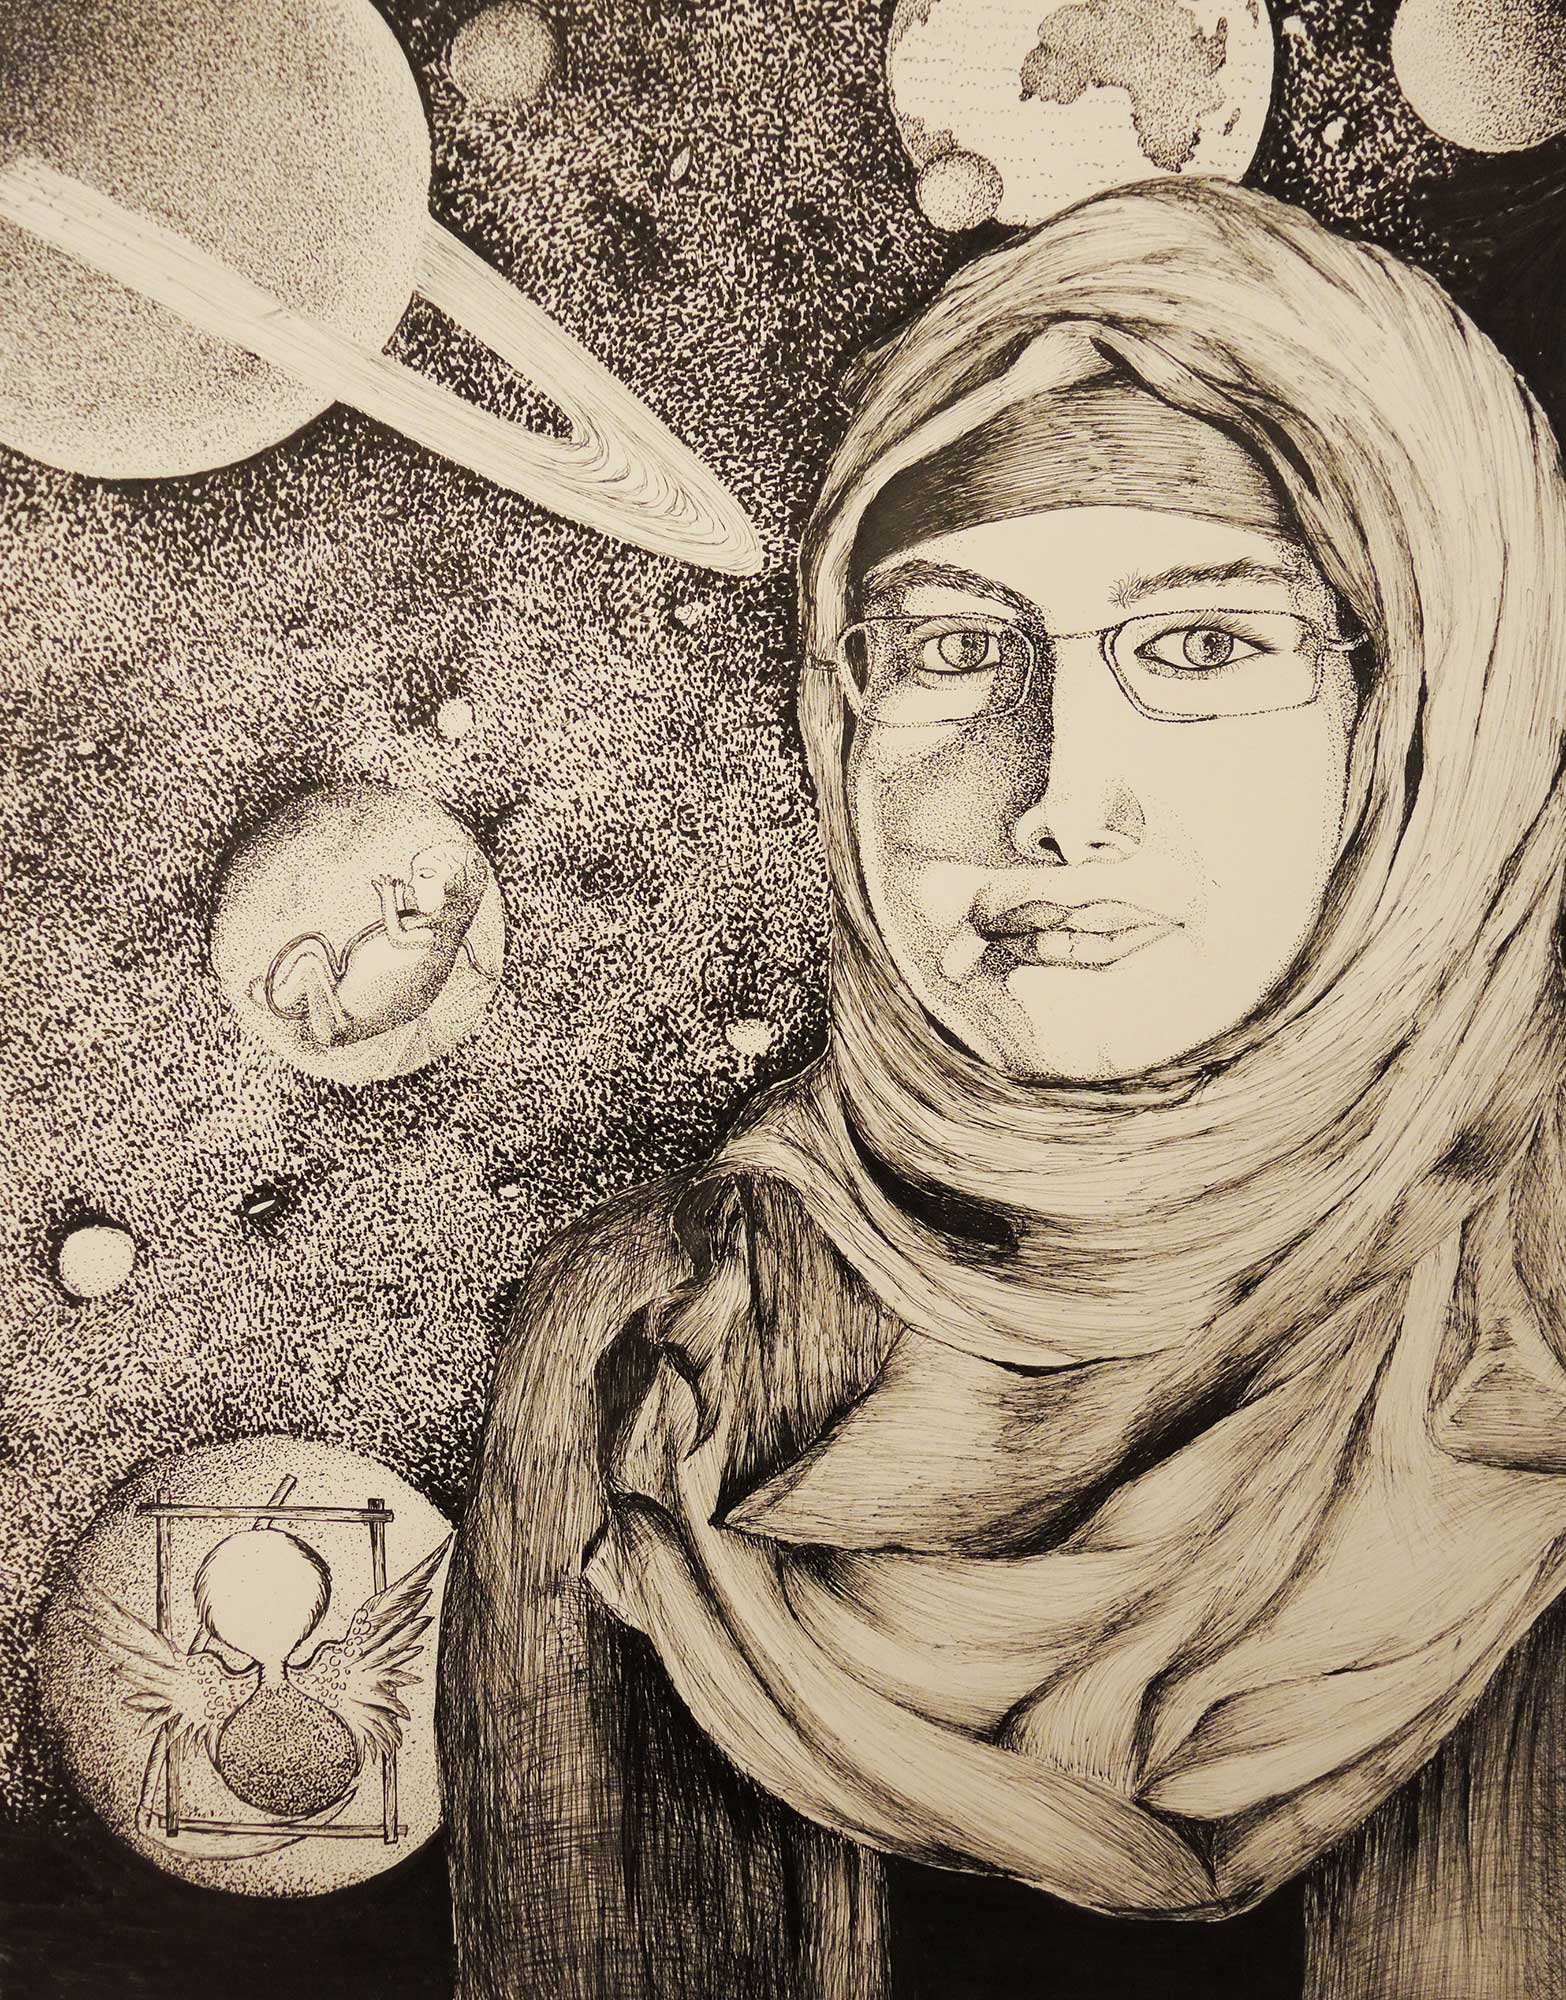 A drawing of a woman wearing a covering in front of a space scene